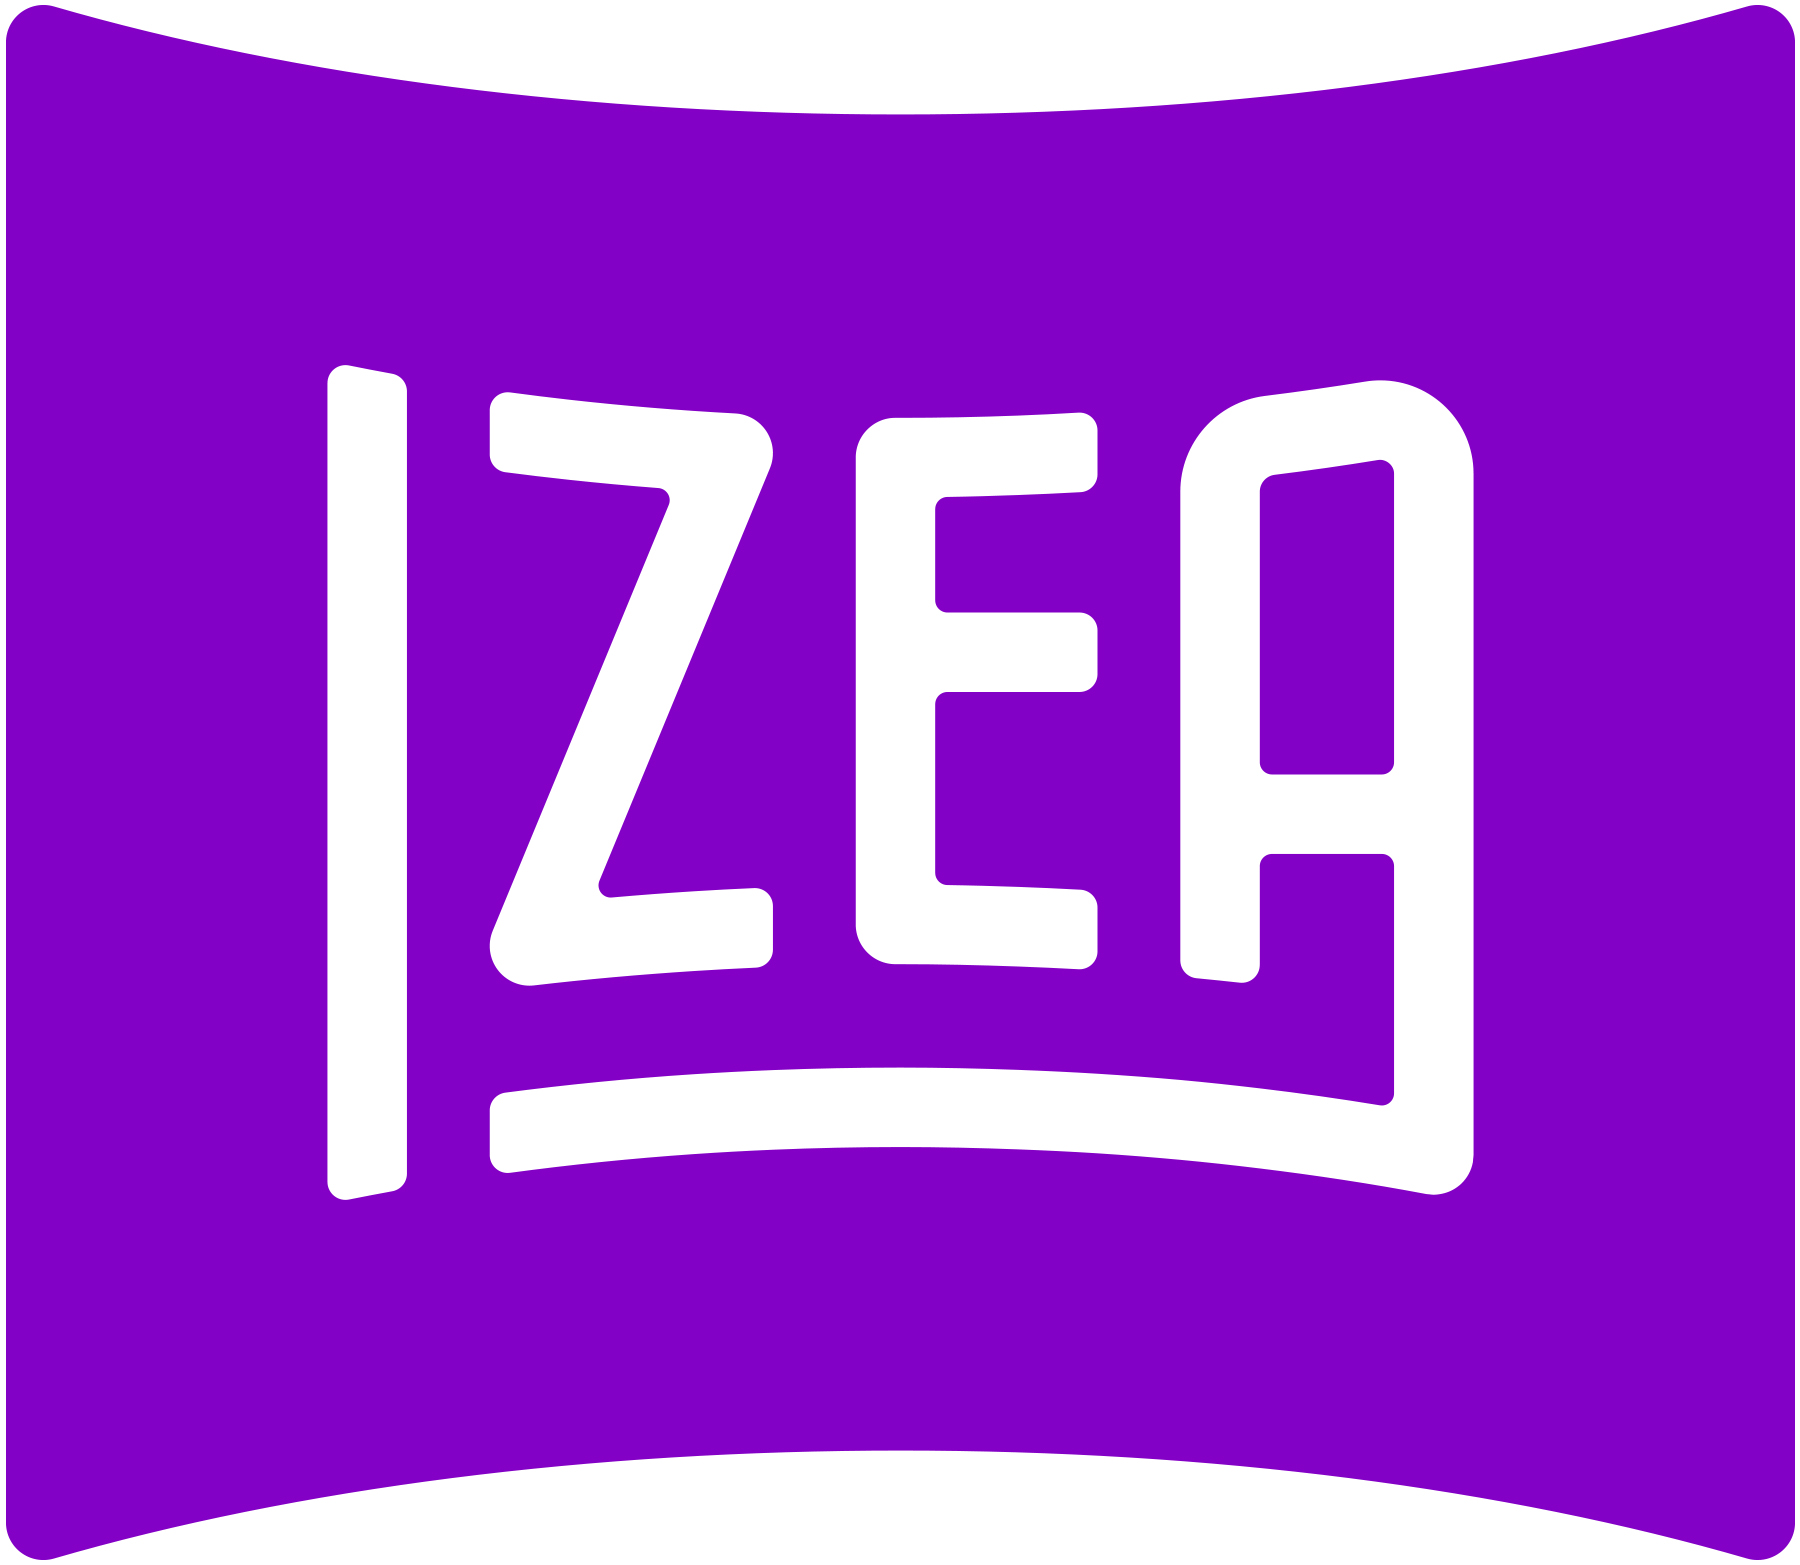 IZEA Report Finds 91% of U.K.-Based Consumers Who Make Influencer-Driven Purchases Have Done So on Amazon - GlobeNewswire